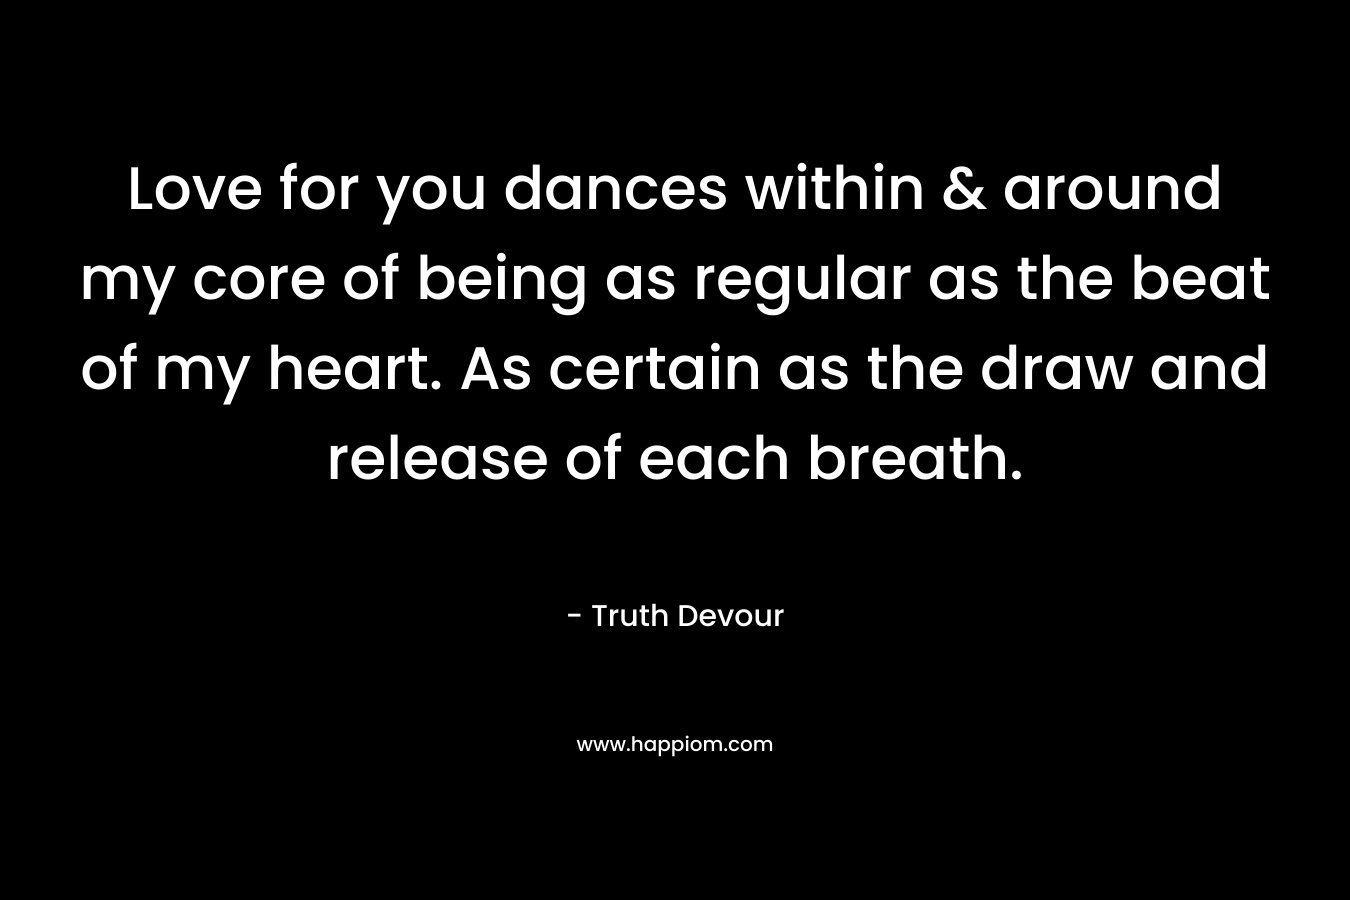 Love for you dances within & around my core of being as regular as the beat of my heart. As certain as the draw and release of each breath.